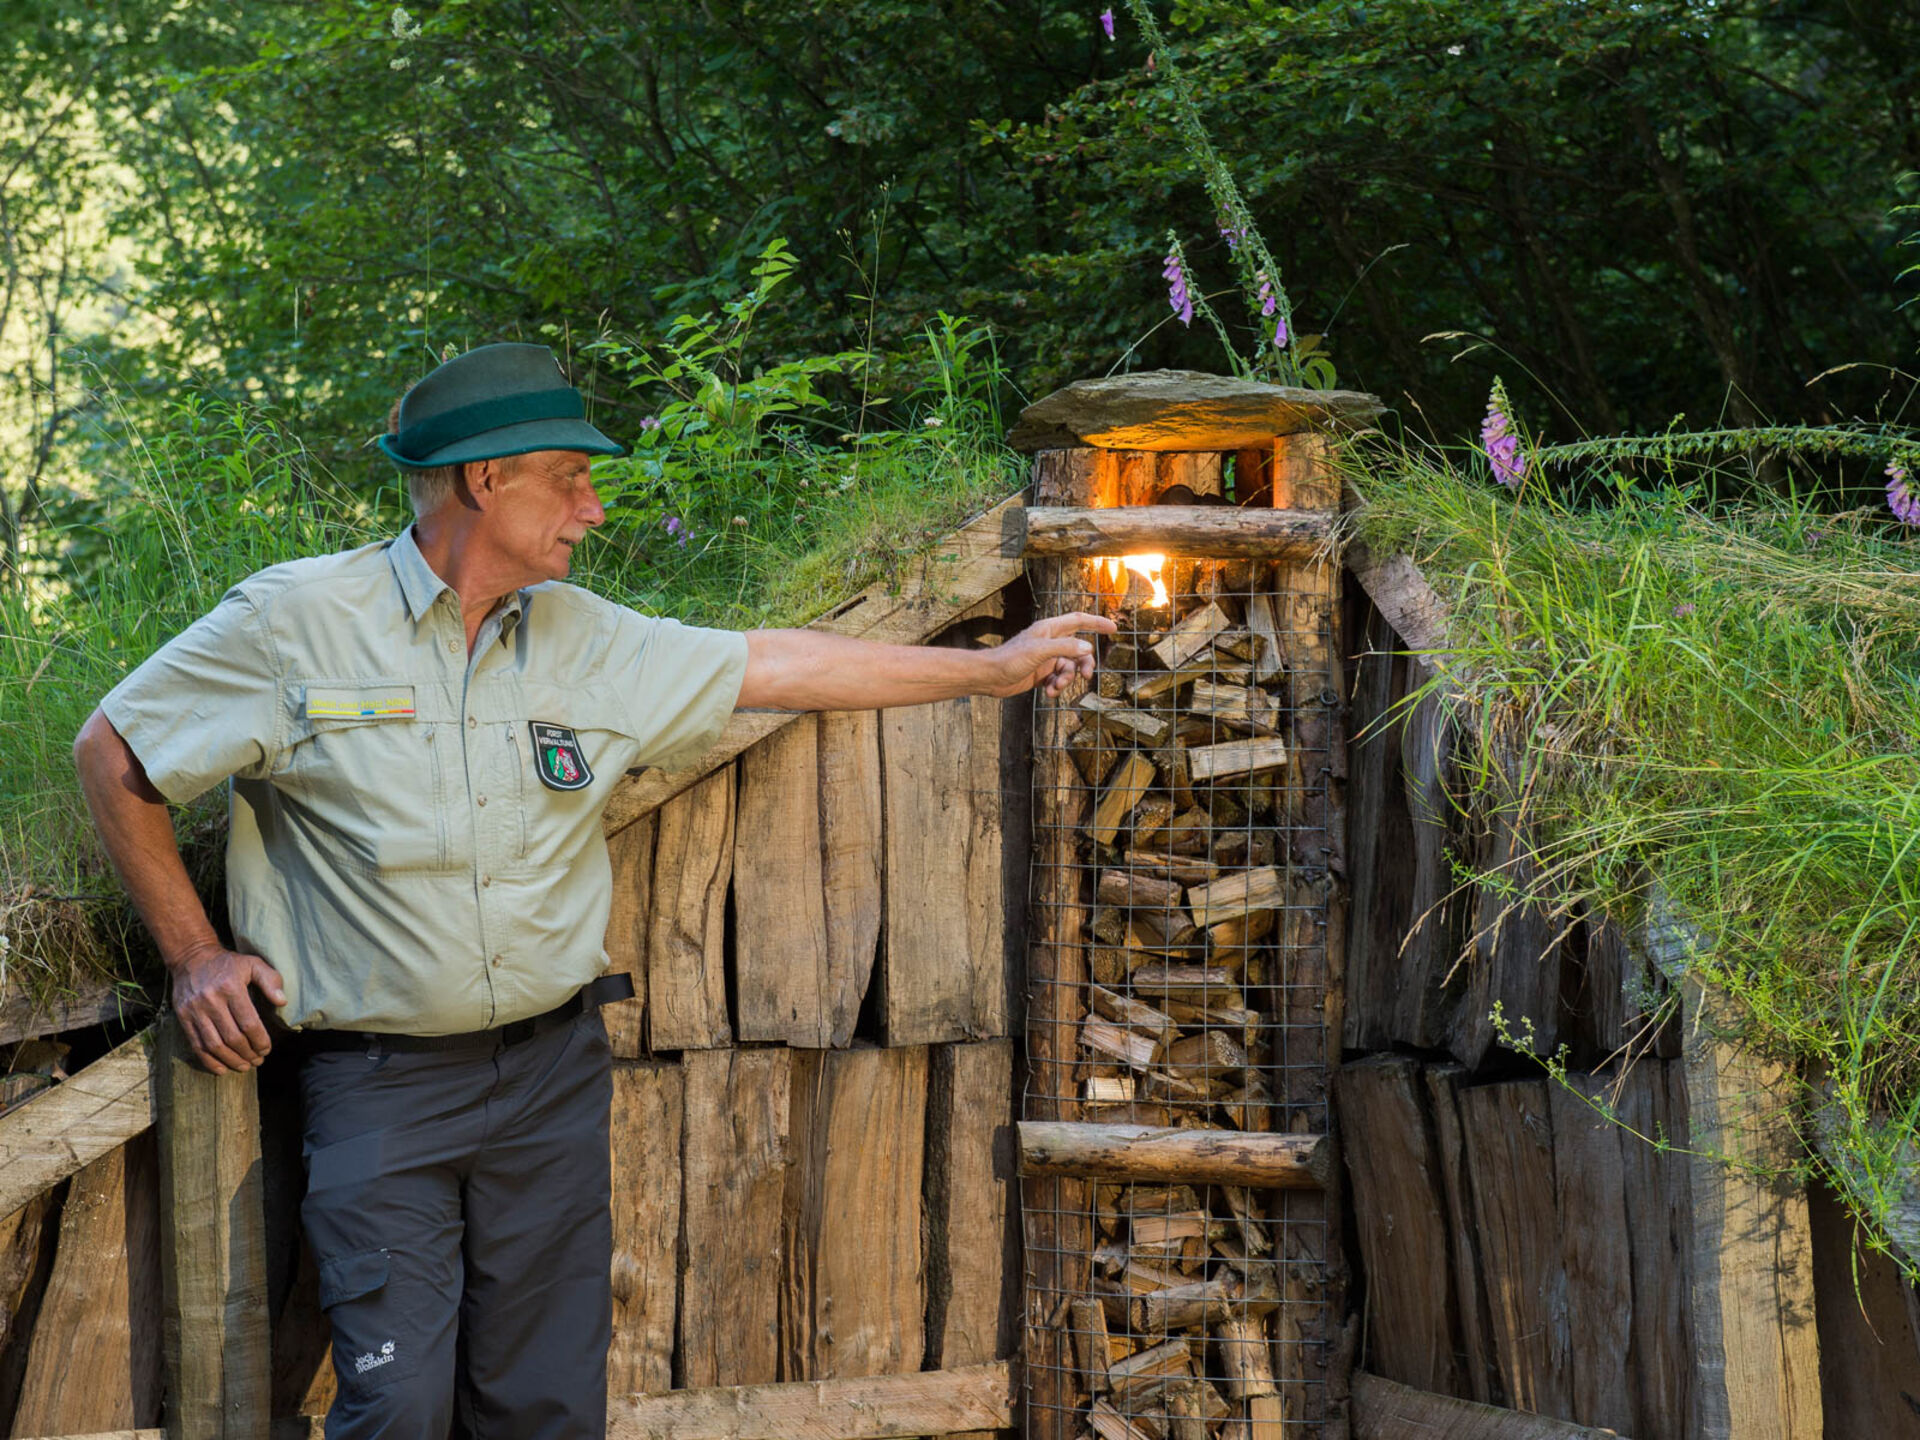 Forest ranger on the forest worker and forest ranger path in Latrop in the Sauerland